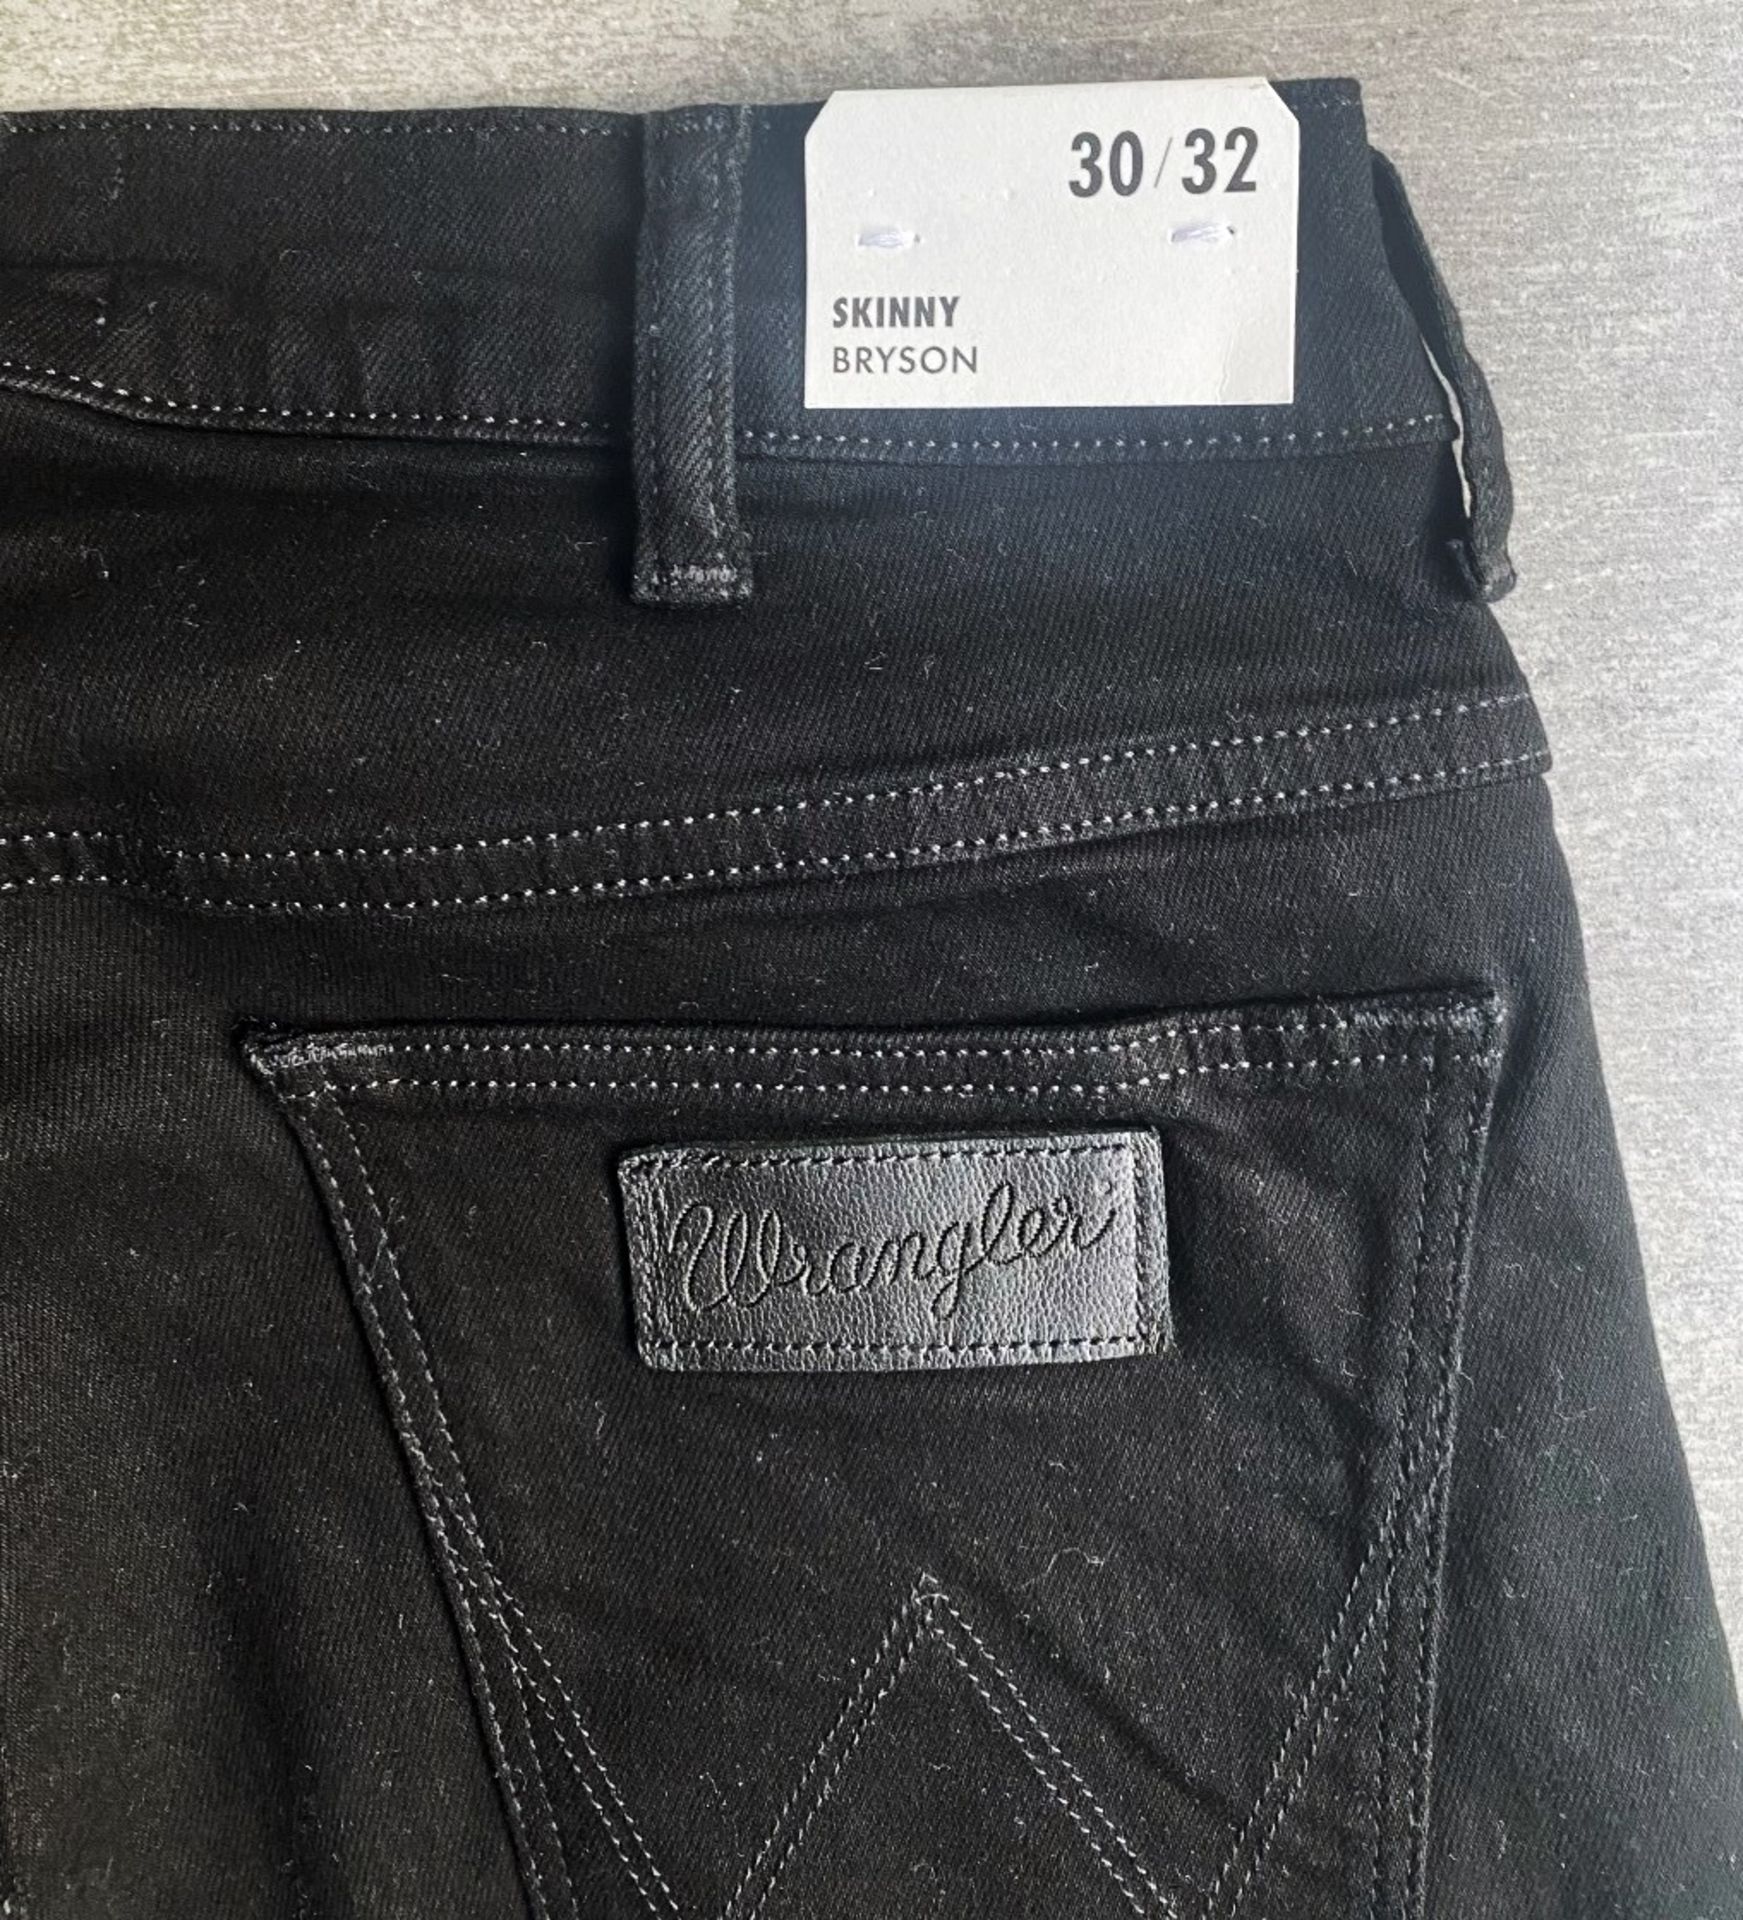 1 x Pair Of Men's Genuine Wrangler Jeans In Black - Size: 30/32 - Preowned, Like New With Tags - - Image 3 of 10